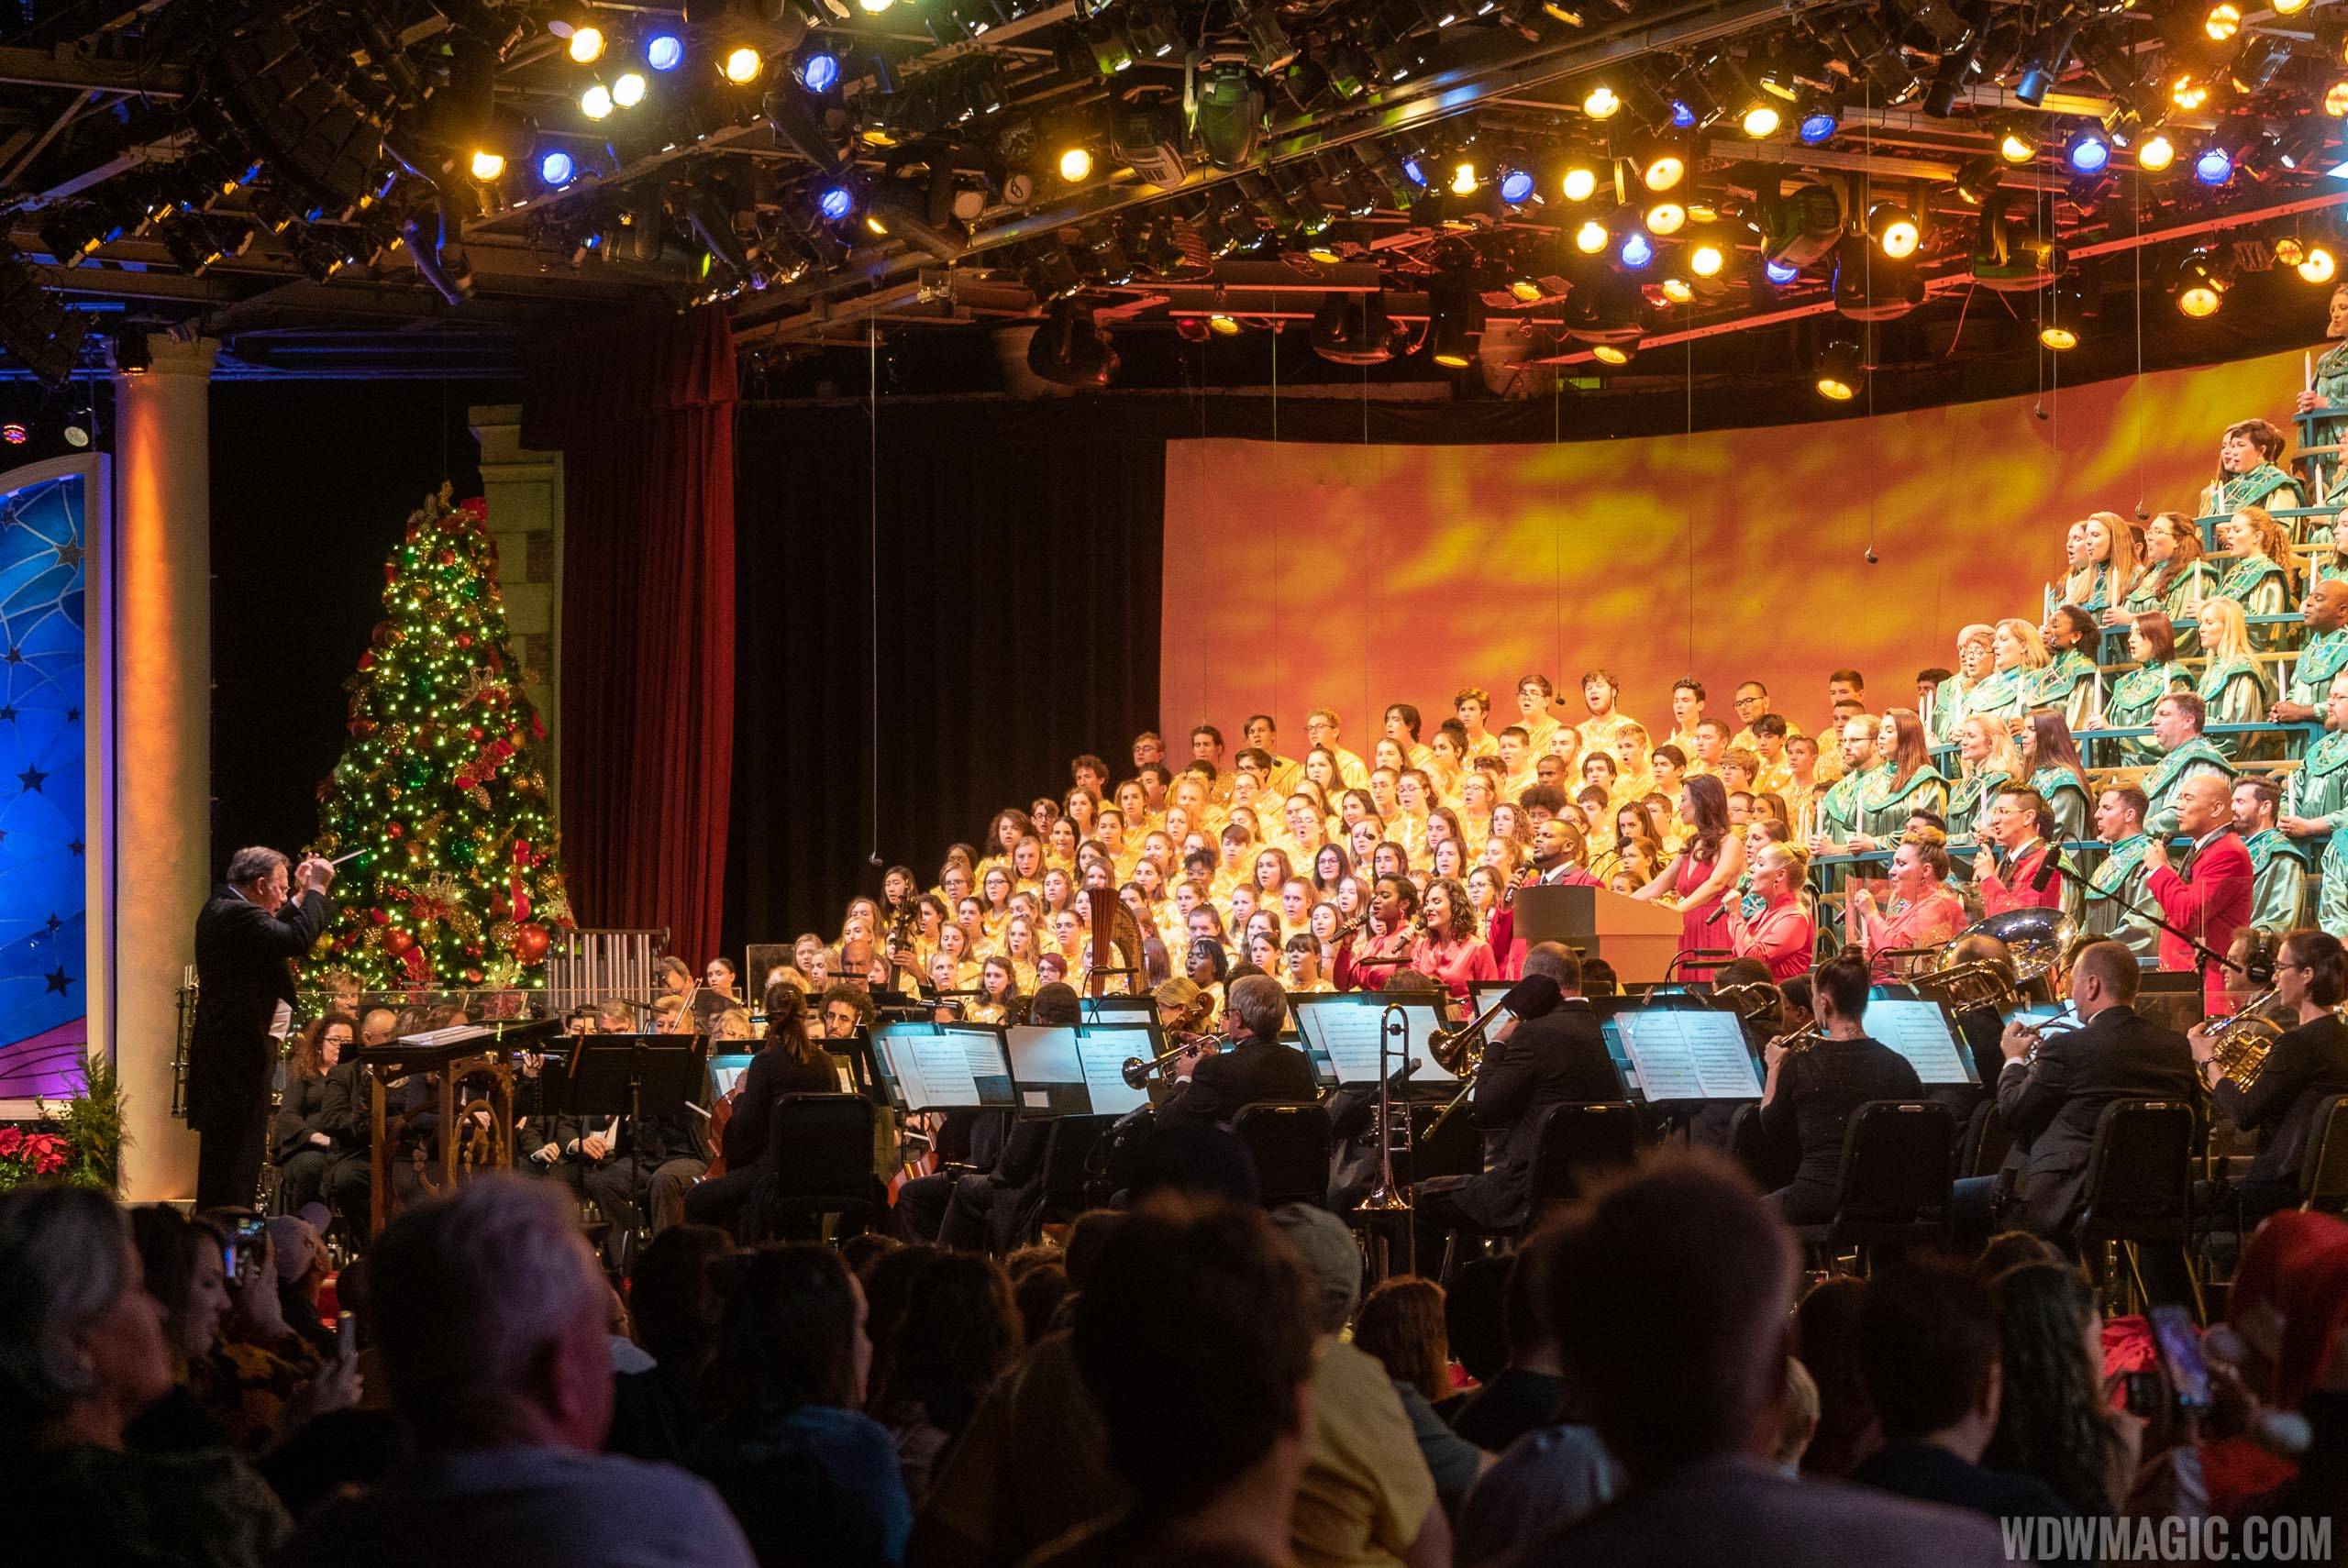 EPCOT's Candlelight Processional